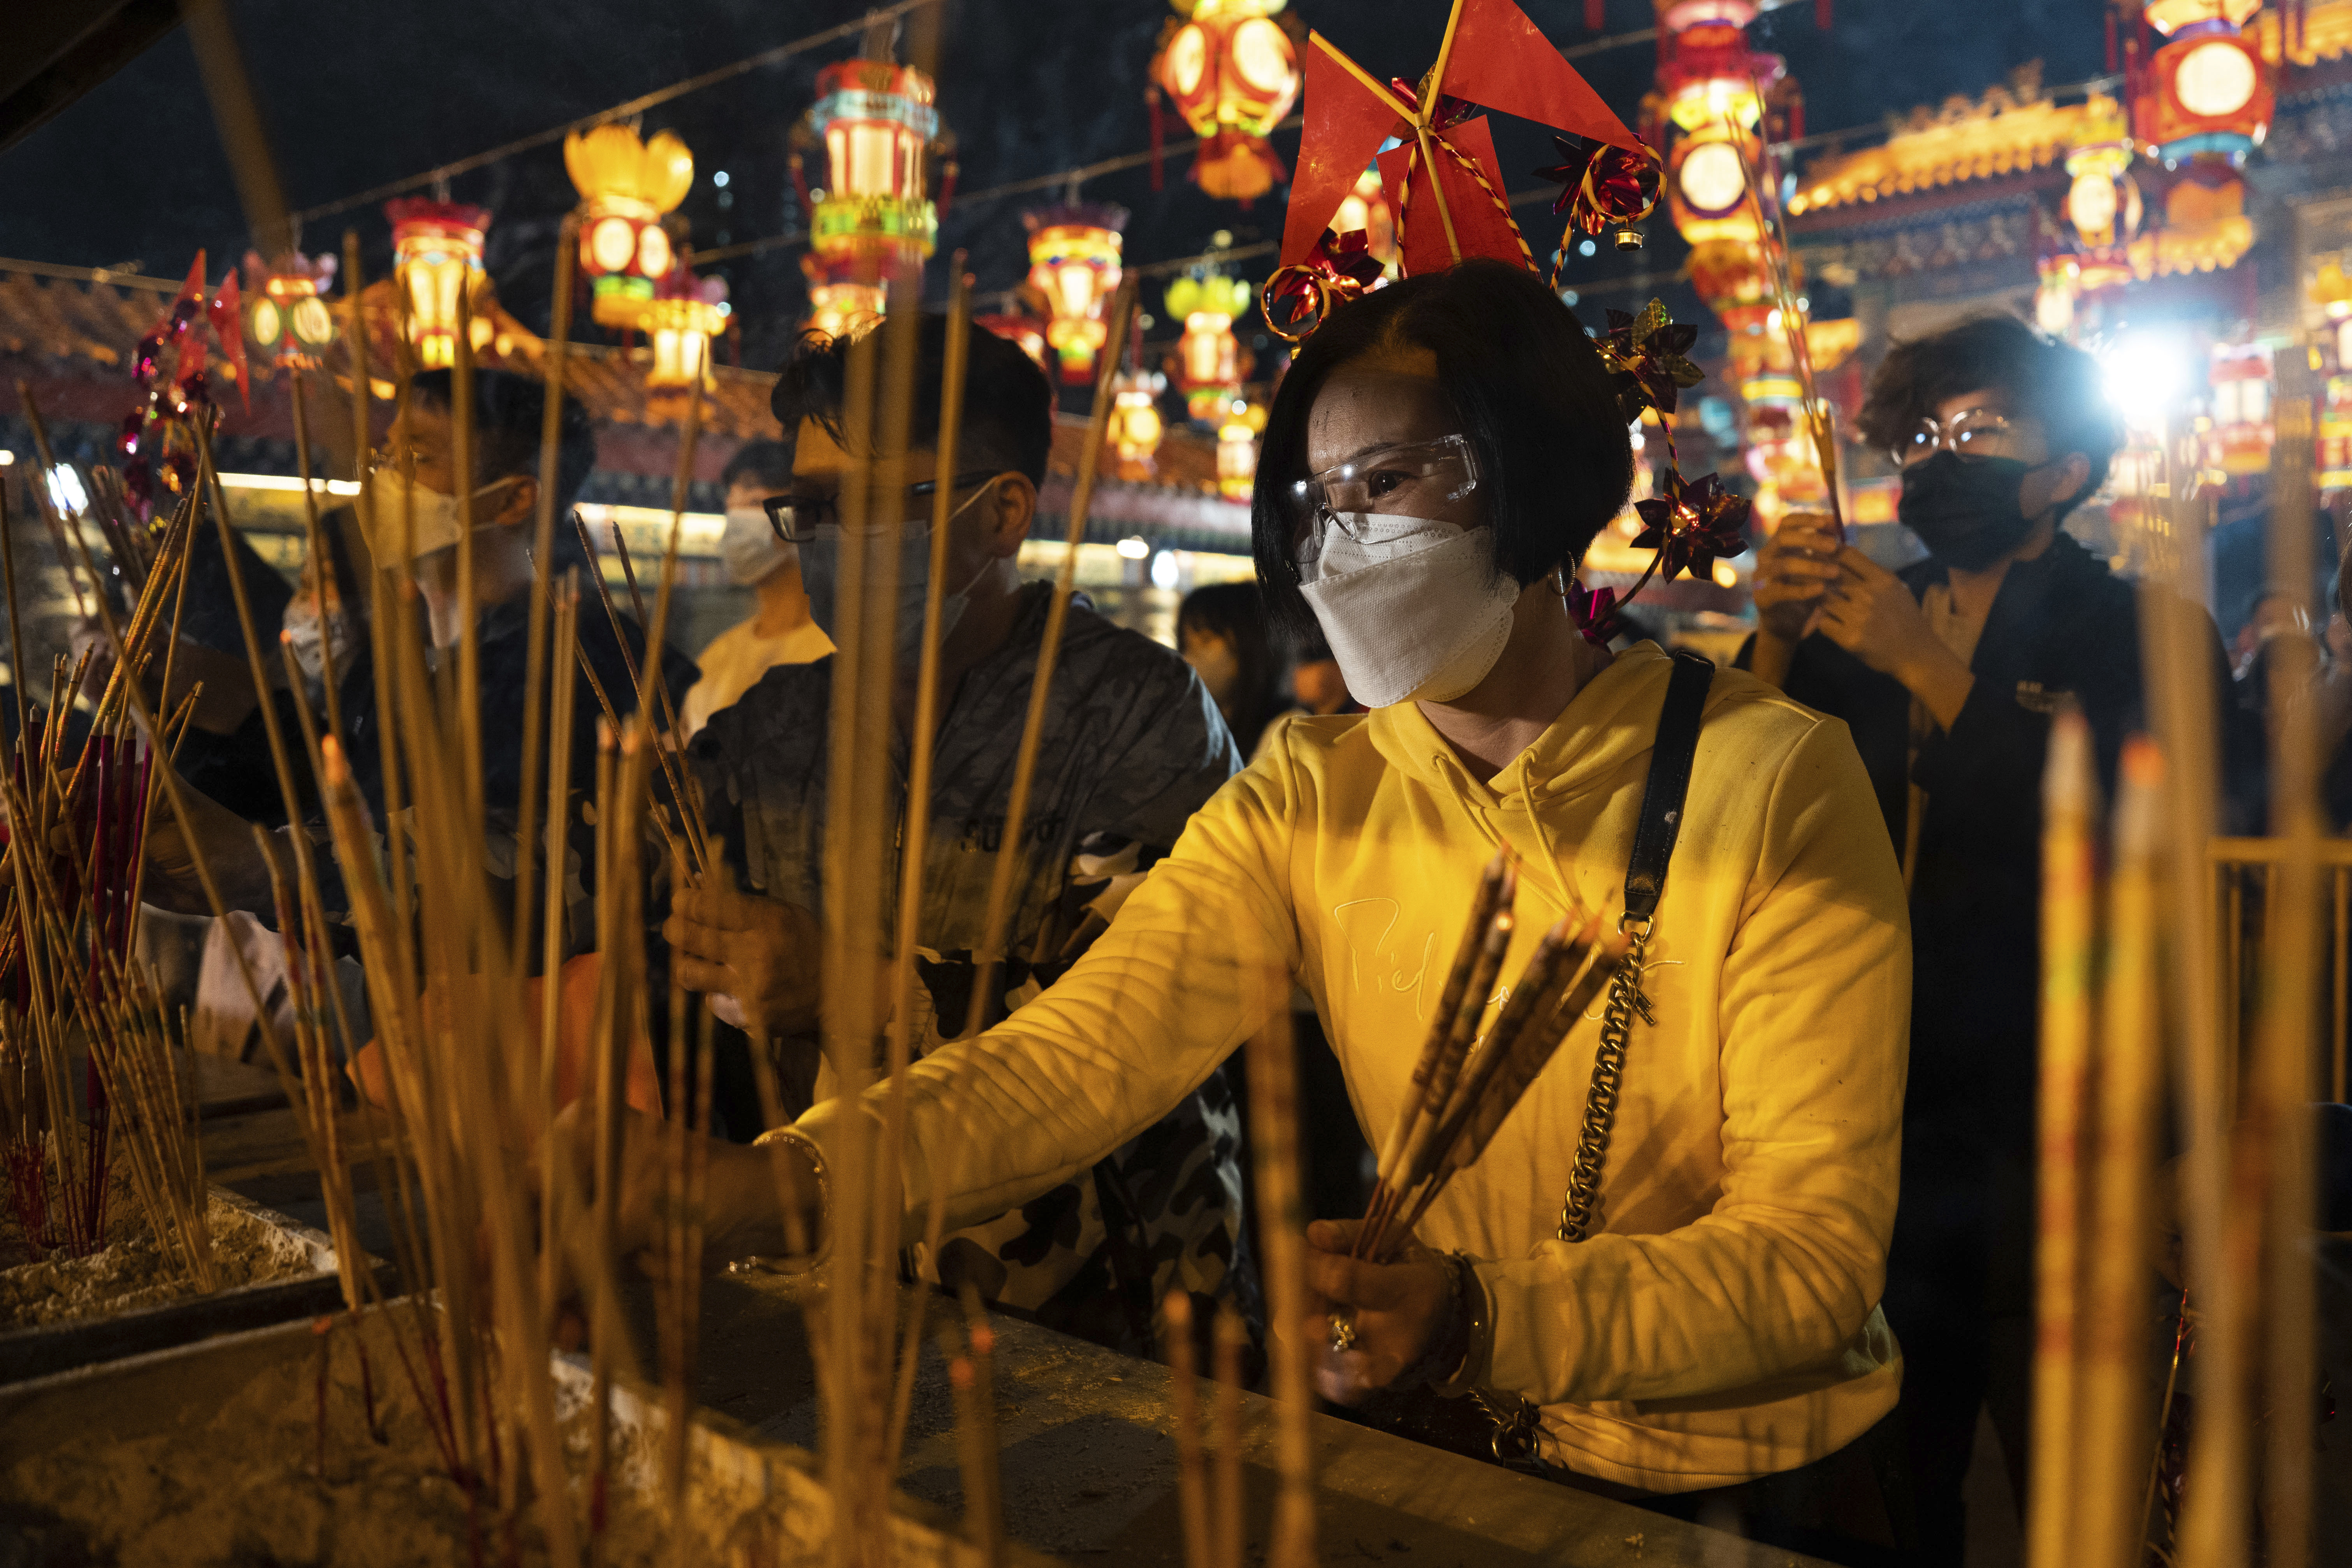 Worshipers wearing face masks light their first incense sticks of the year to pray at Wong Tai Sin Temple in Hong Kong on Saturday, January 21, 2023, to celebrate the Lunar New Year and the start of the Year of the Rabbit.  (AP Photo/Bertha Wang)